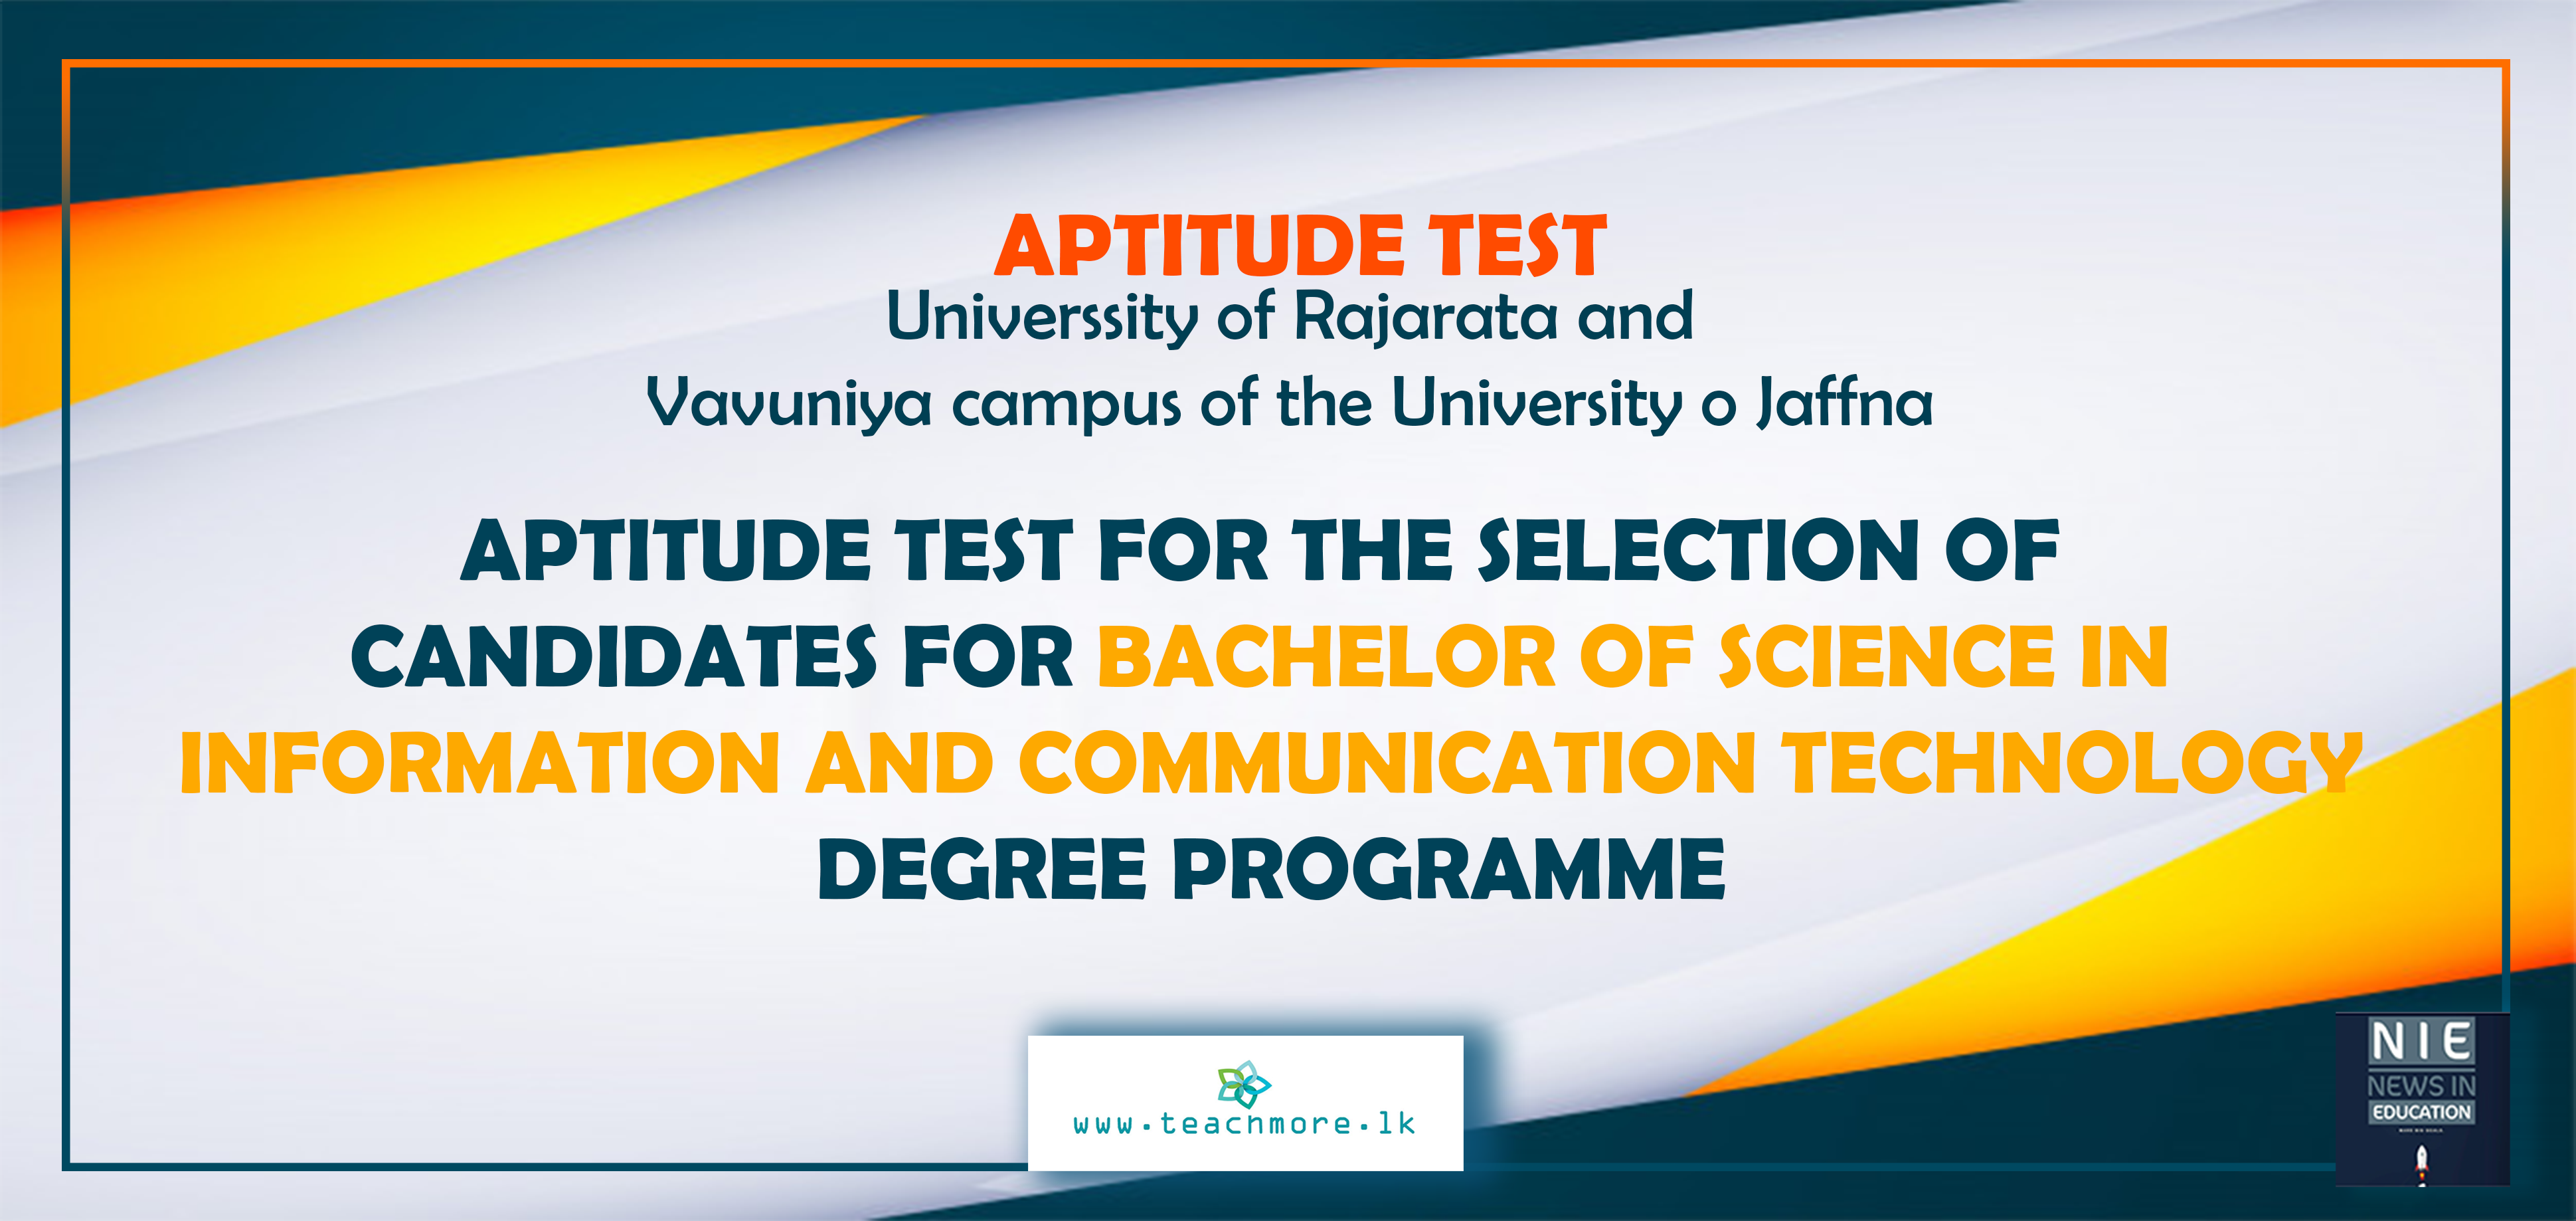 APTITUDE TEST BACHELOR OF SCIENCE IN INFORMATION AND COMMUNICATION TECHNOLOGY DEGREE PROGRAMME